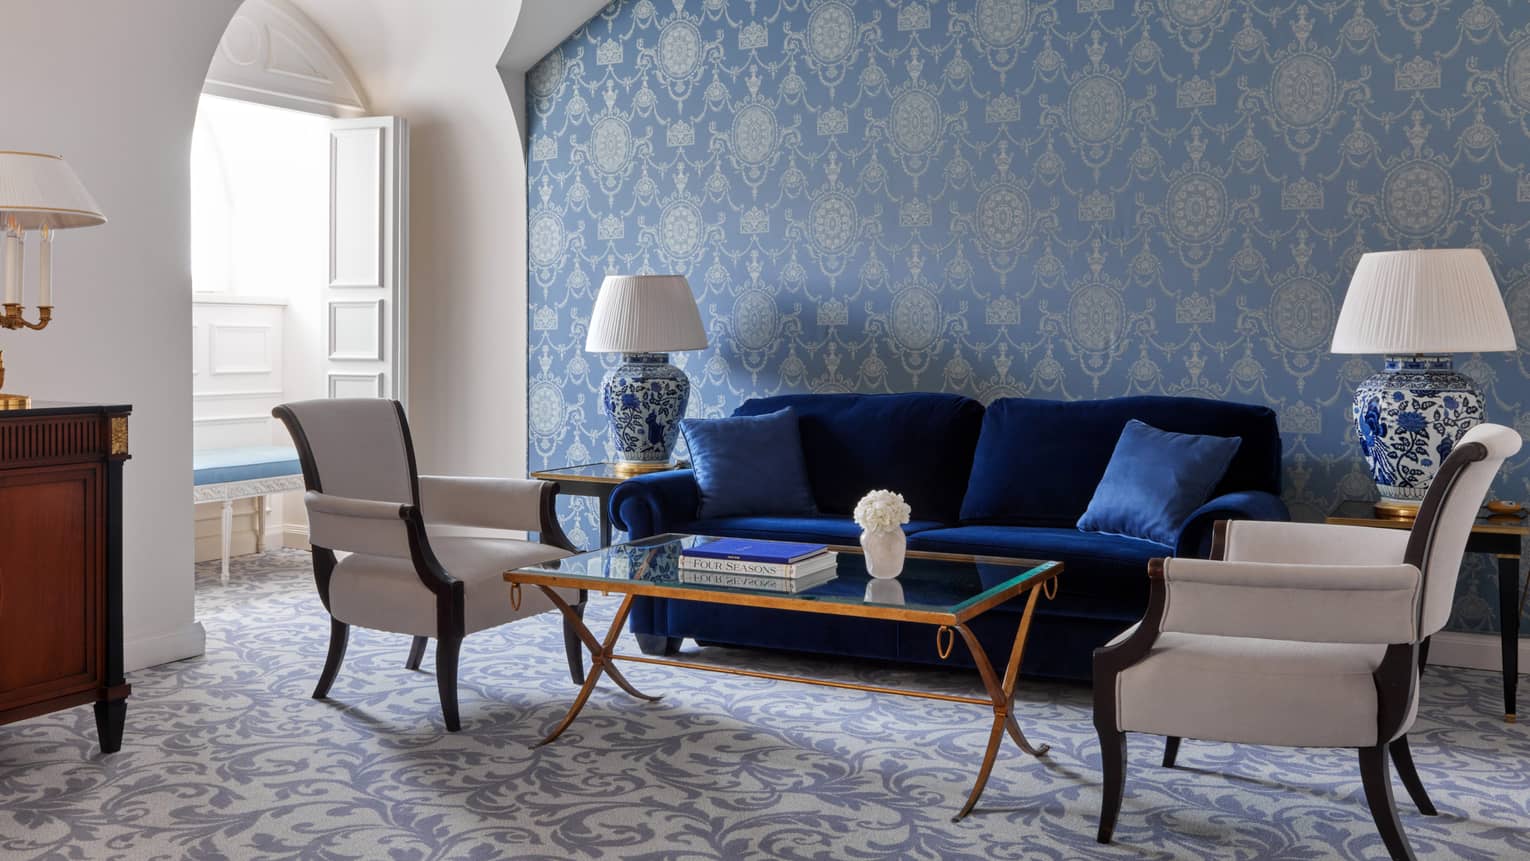 Living room with dark blue sofa, two chairs and blue wallpaper